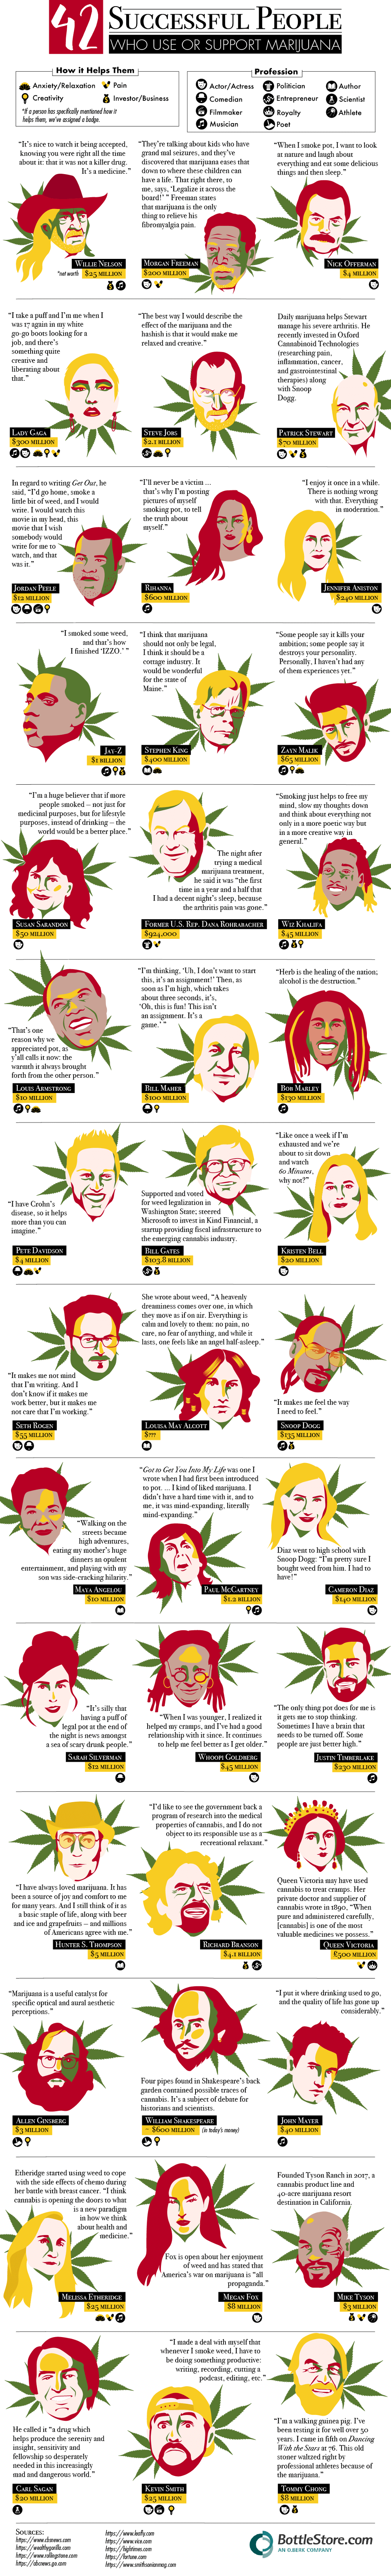 42 Successful People Who Use Or Support Marijuana - BottleStore.com - Infographic